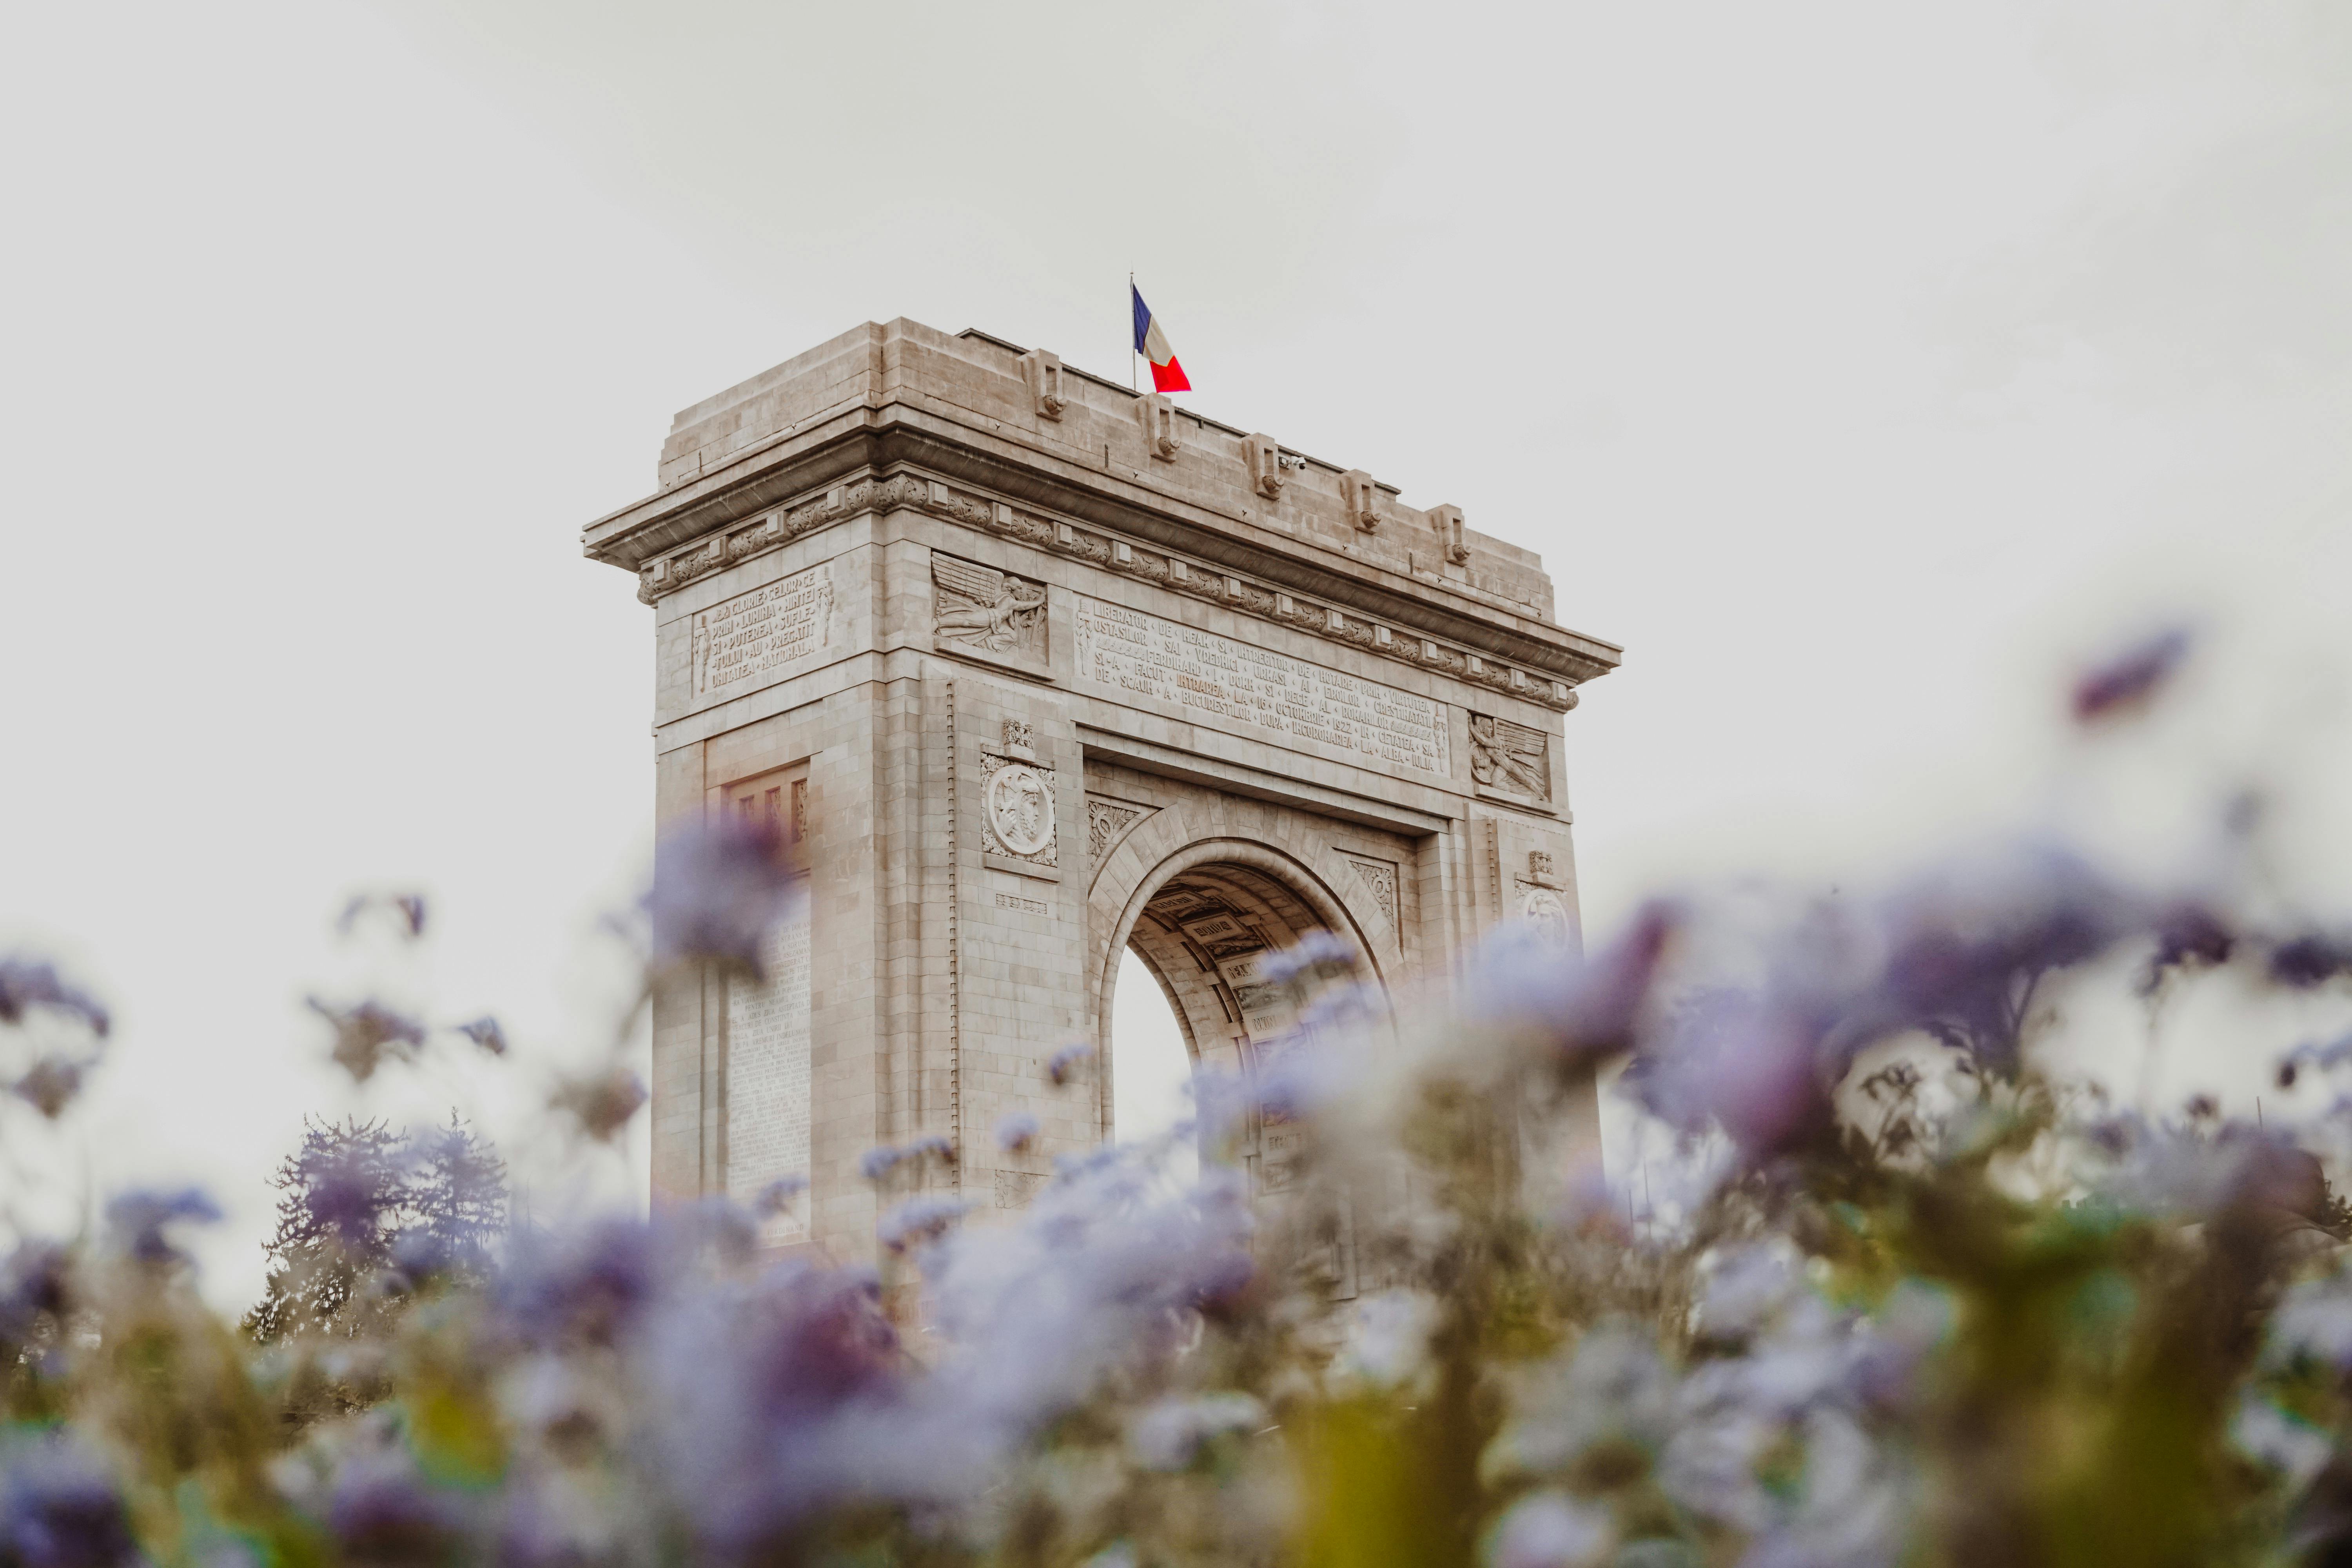 Champs Elysees Pictures  Download Free Images on Unsplash